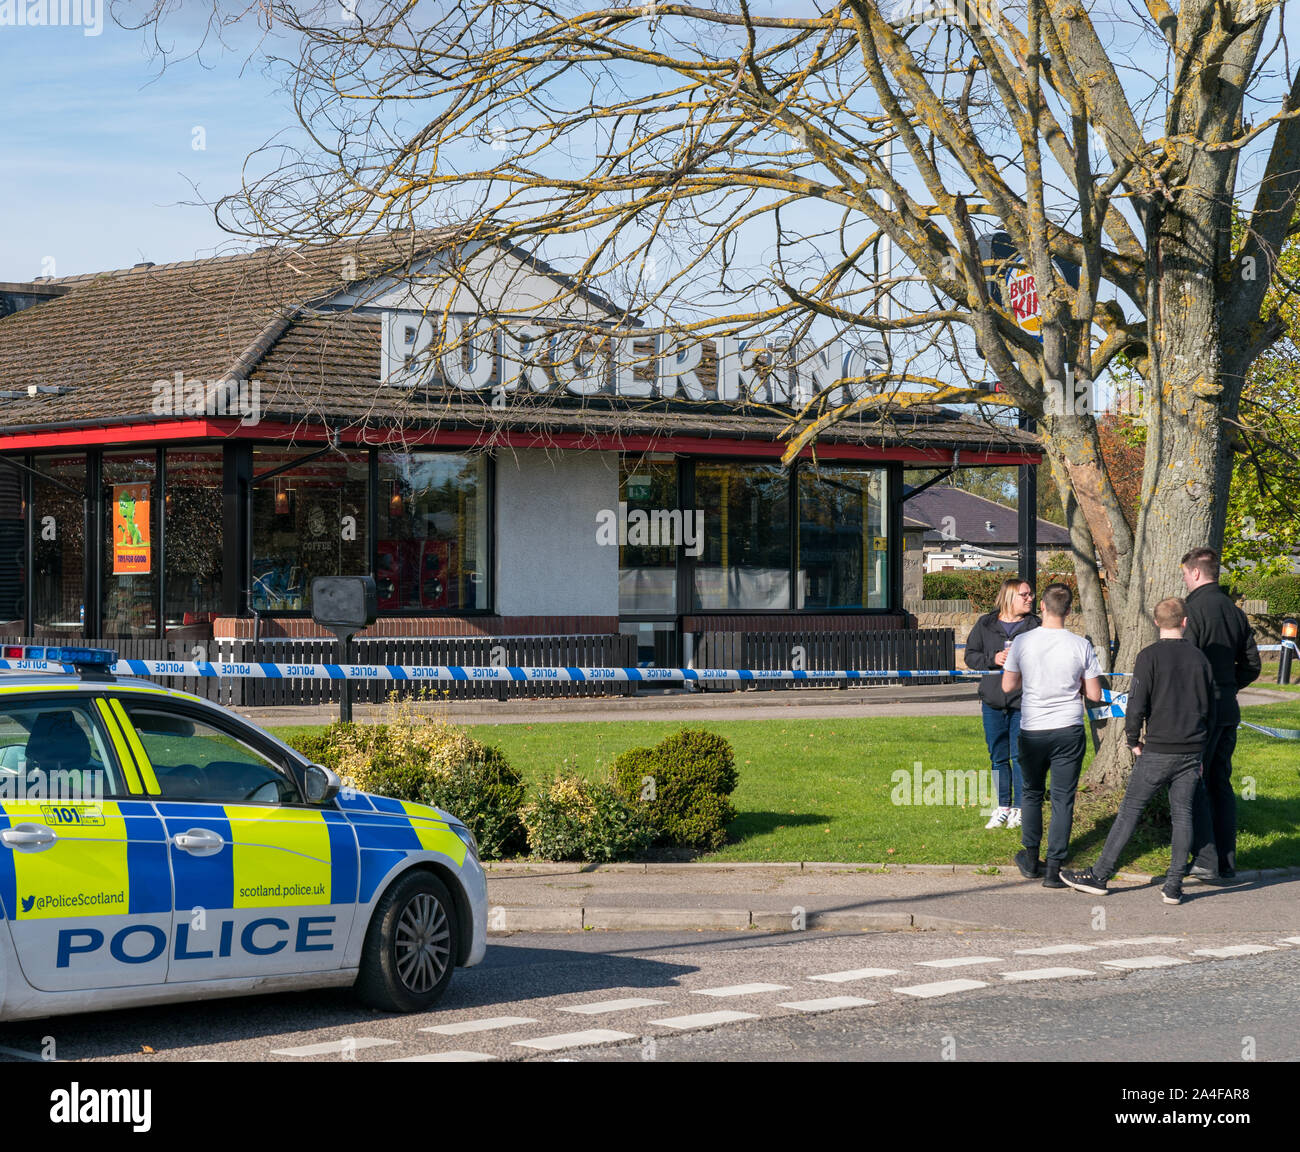 Elgin, Moray, Scotland, UK. 14th Oct, 2019. This is the scene of the Robbery in relation to the following Police PR. Police in Elgin are appealing for information following a robbery at a business premises in the Ashgrove Road area of the town. The incident happened around 11.50pm on Sunday, 13 October, when two men entered Burger King and demanded cash. They then left with a three figure sum which was later recovered. Both men are described as tall, stocky build and are not believed to have had local accents. Credit: JASPERIMAGE/Alamy Live News Stock Photo